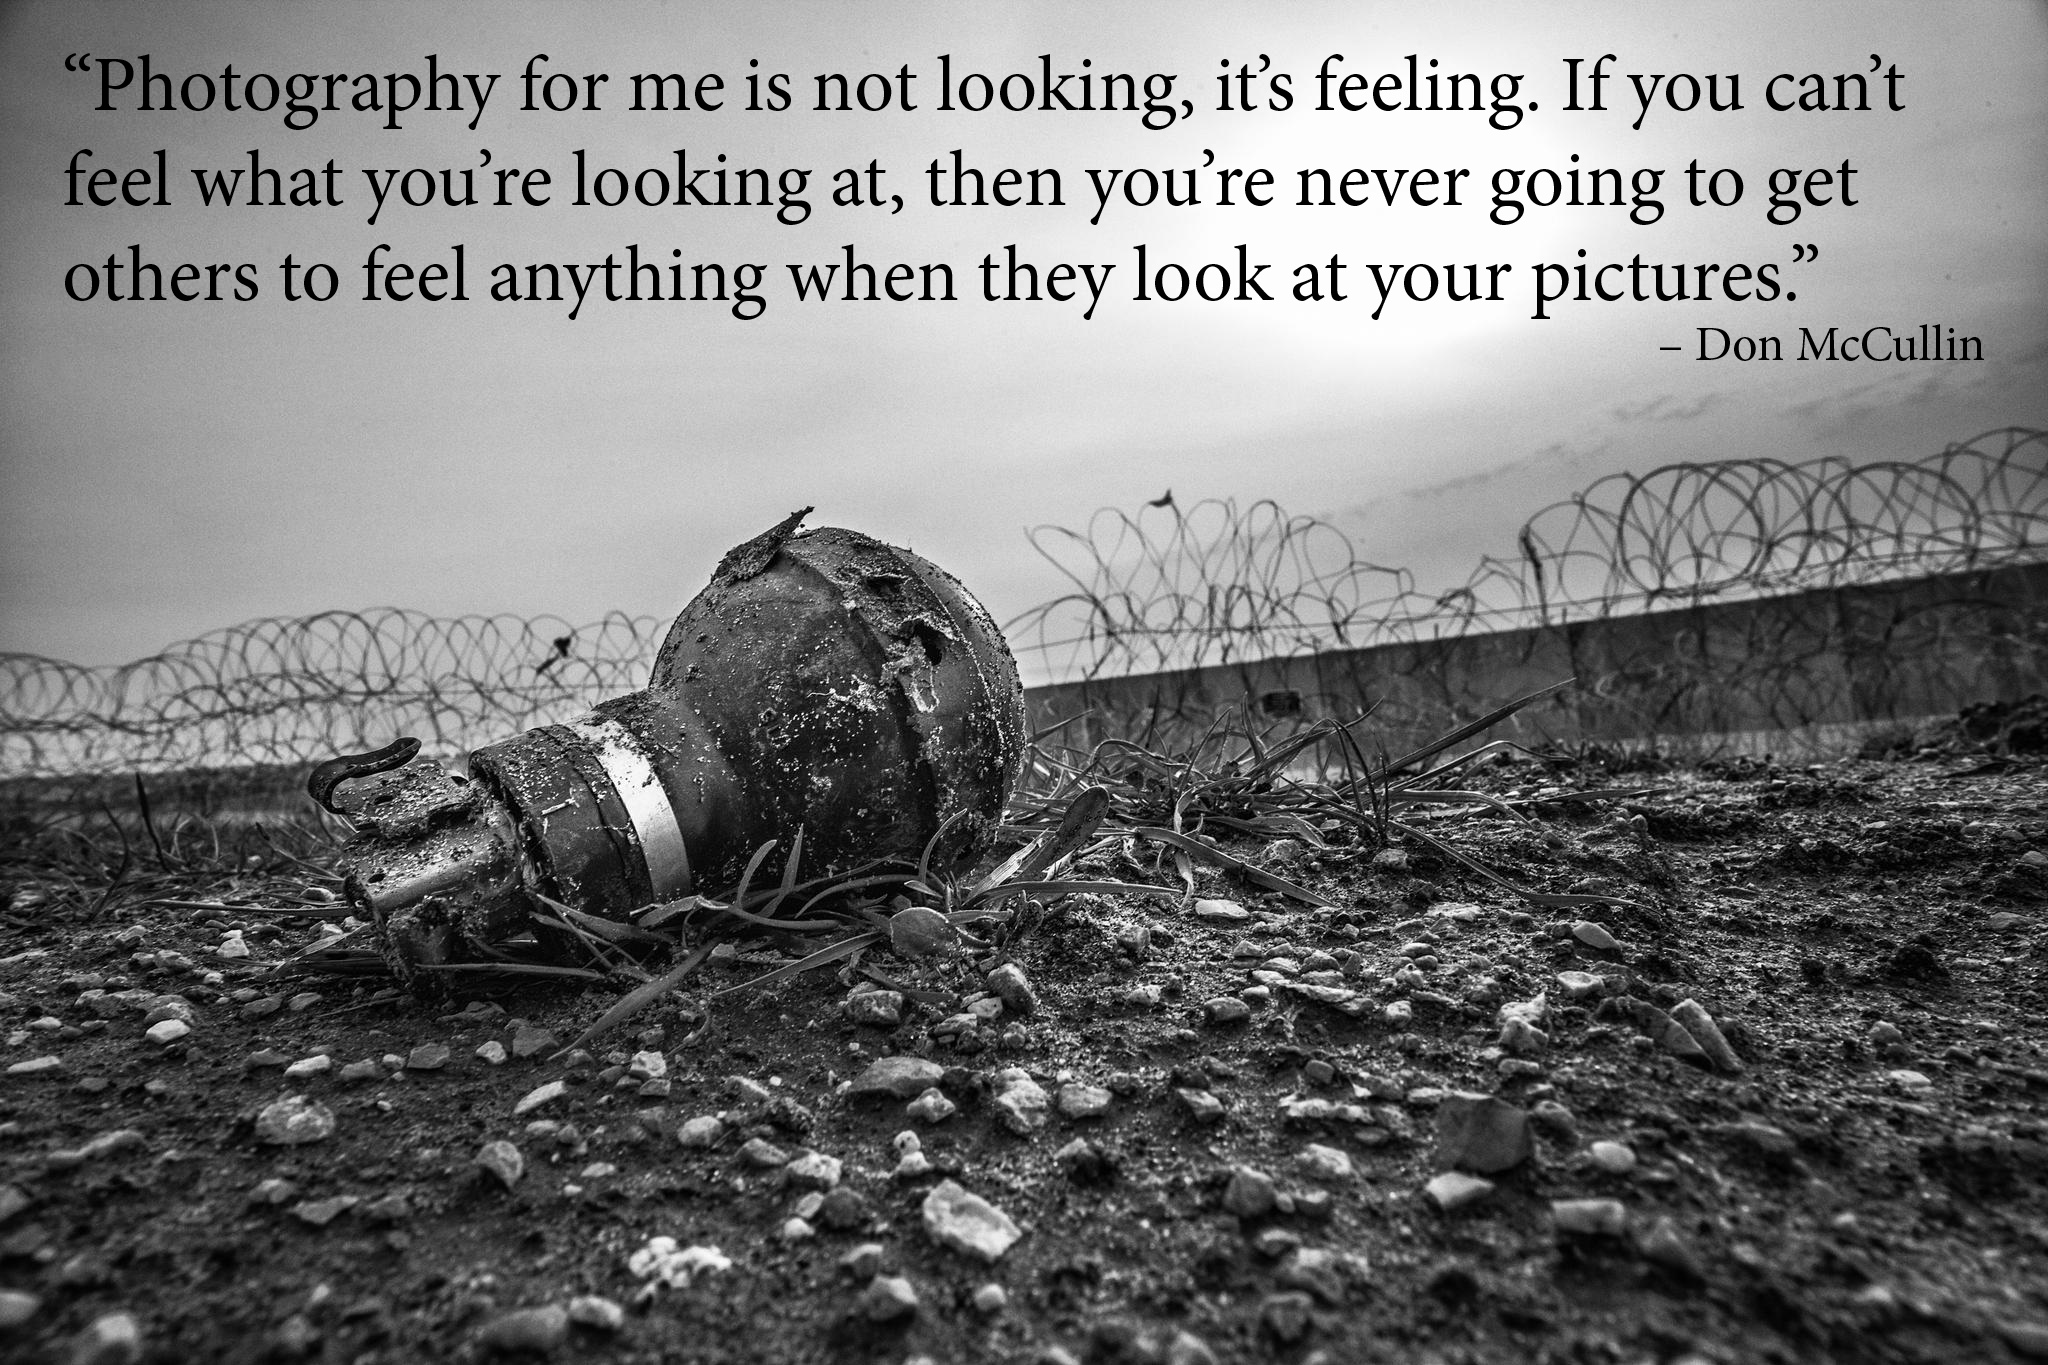 Photography for me is not looking, it's feeling. If you can't feel what you're looking at, then you're never going to get others to feel anything when they look at ... Don McCullin